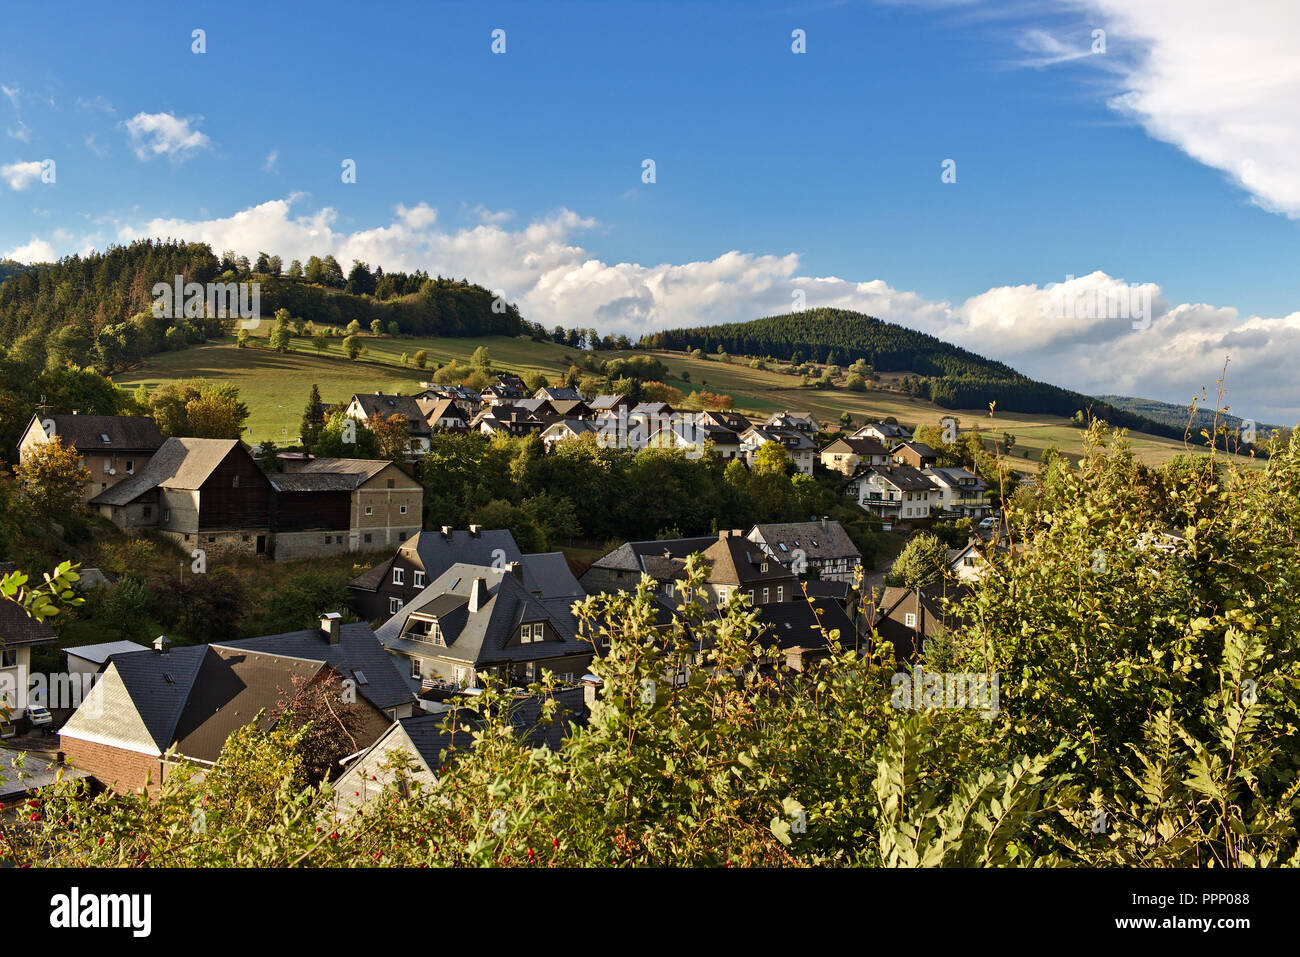 Schwalefeld, Germany - Small village nestled in the green hills of the Sauerland region with wooded hilltops and blue sky in the background Stock Photo